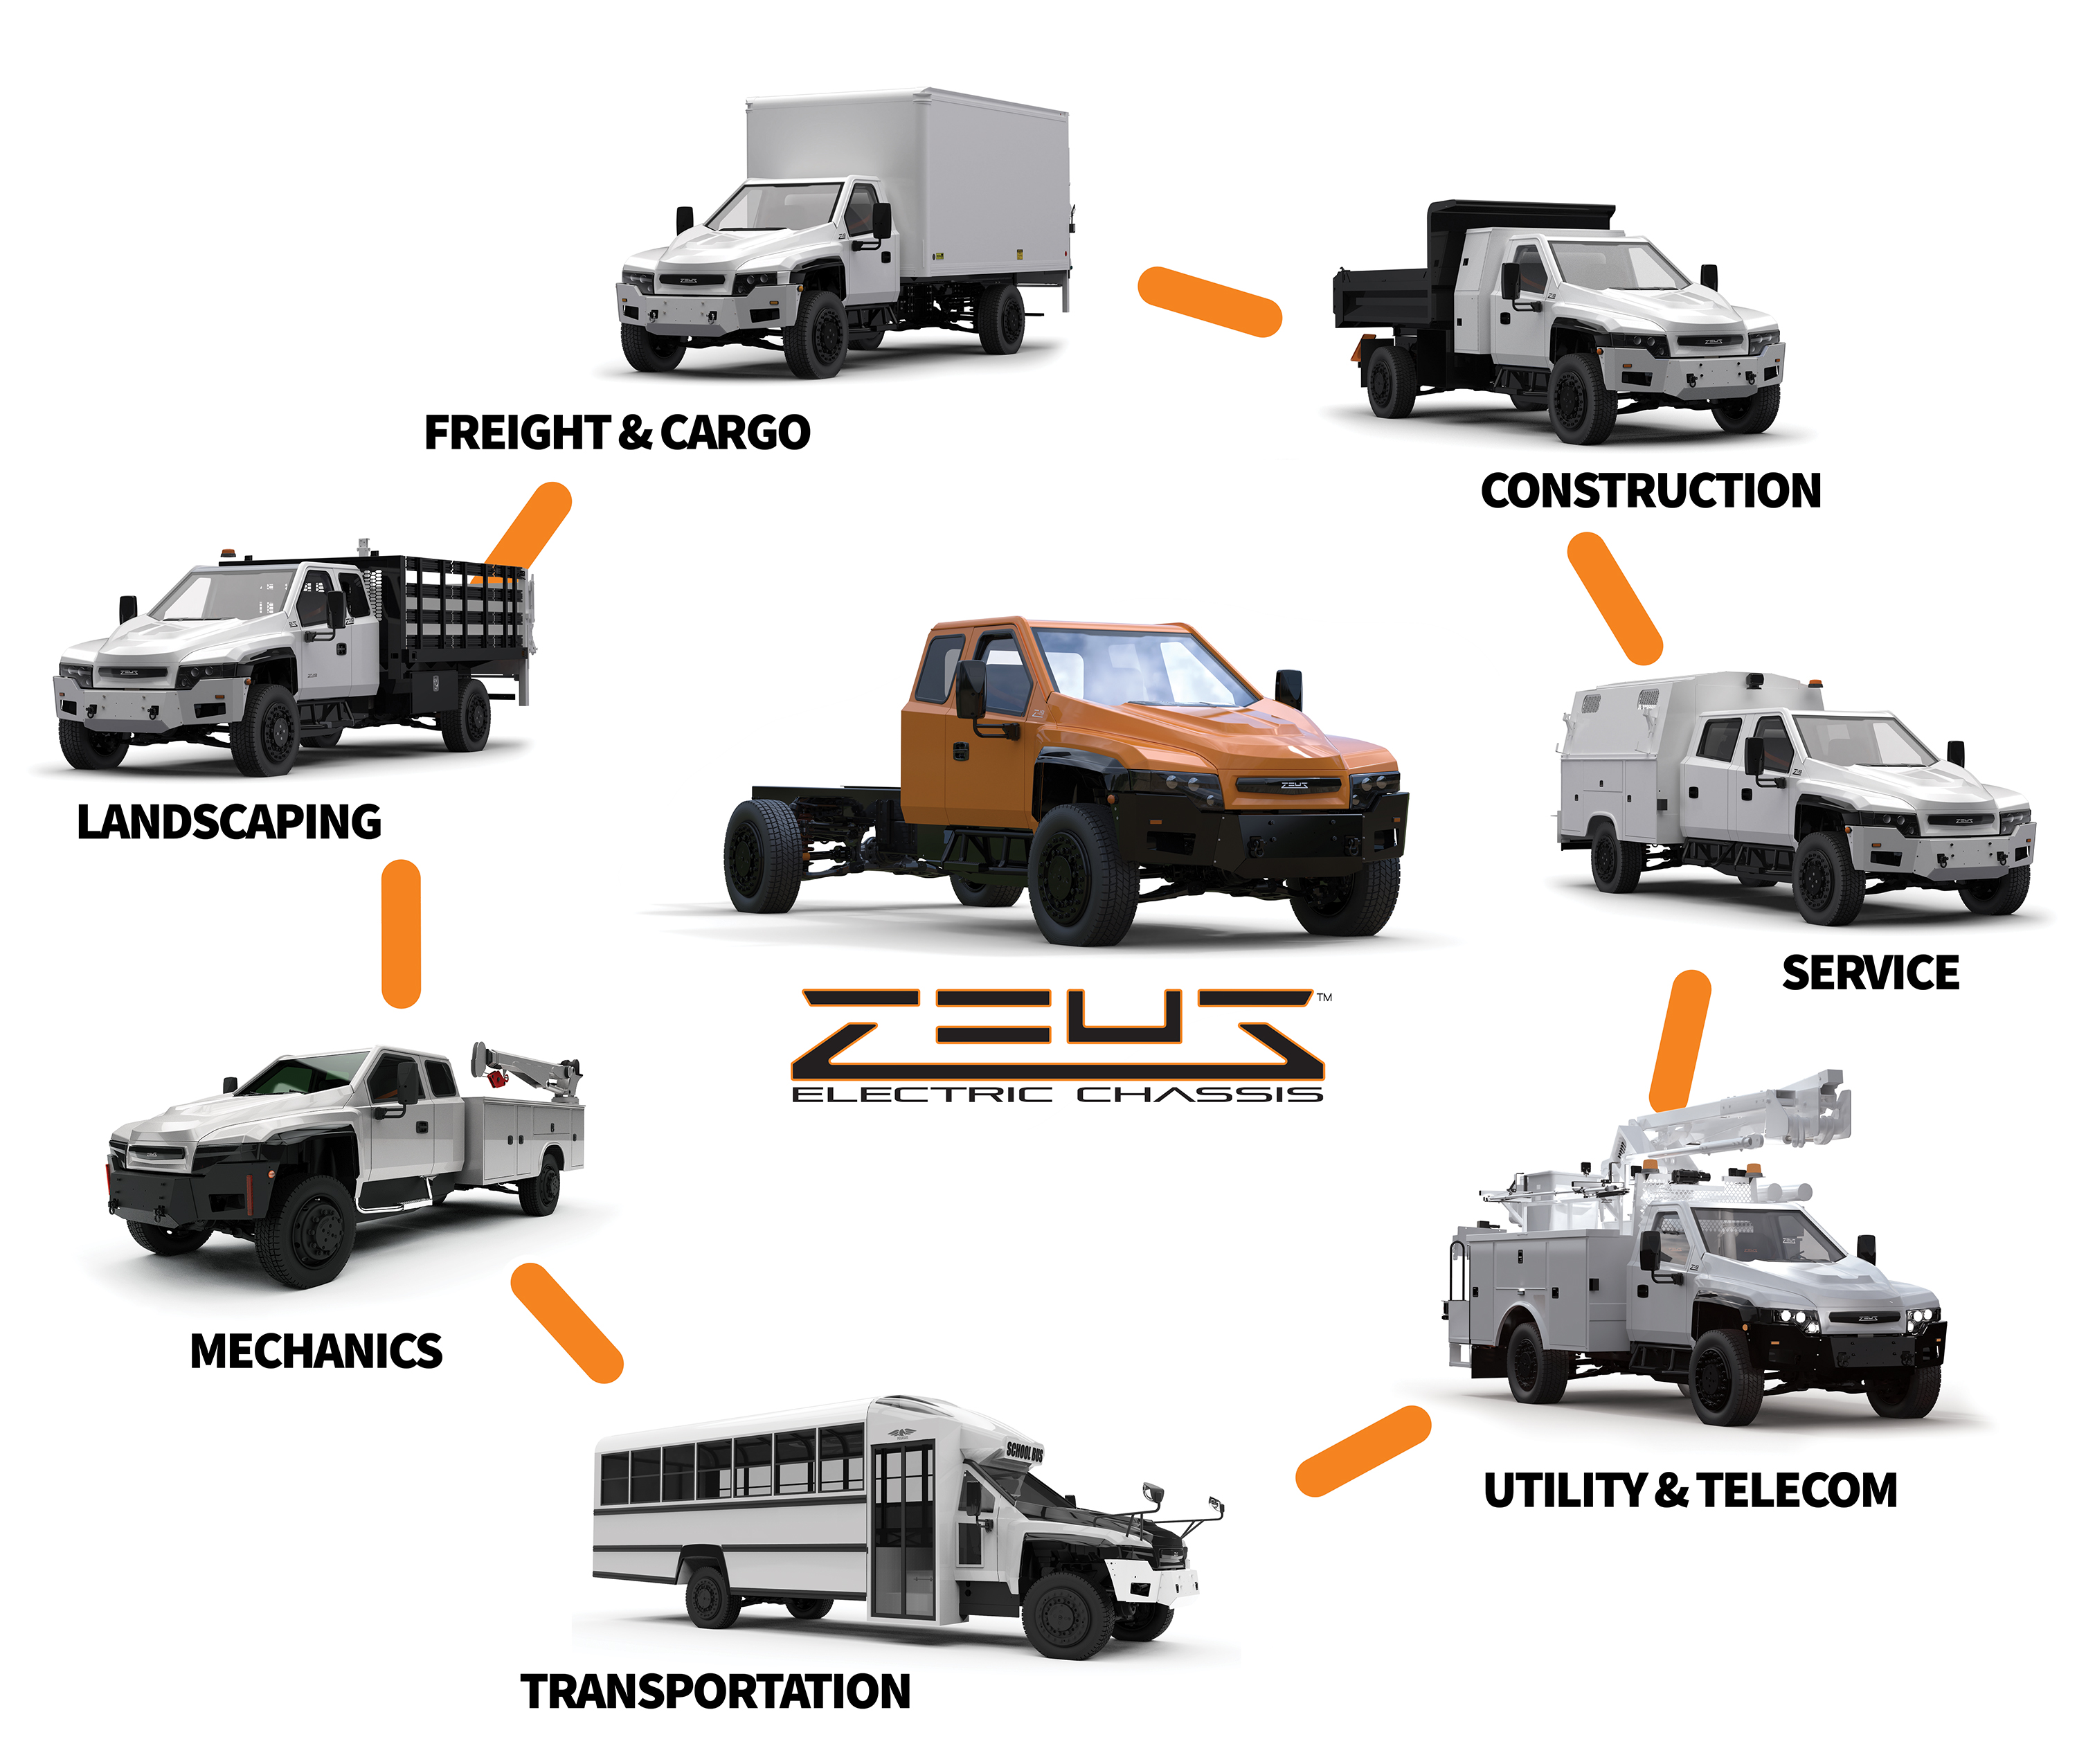 Zeus' Class 4-6 cab-chassis is designed from the ground up to accommodate the widest possible variety of truck bodies and to operate all traditional truck-mounted equipment.